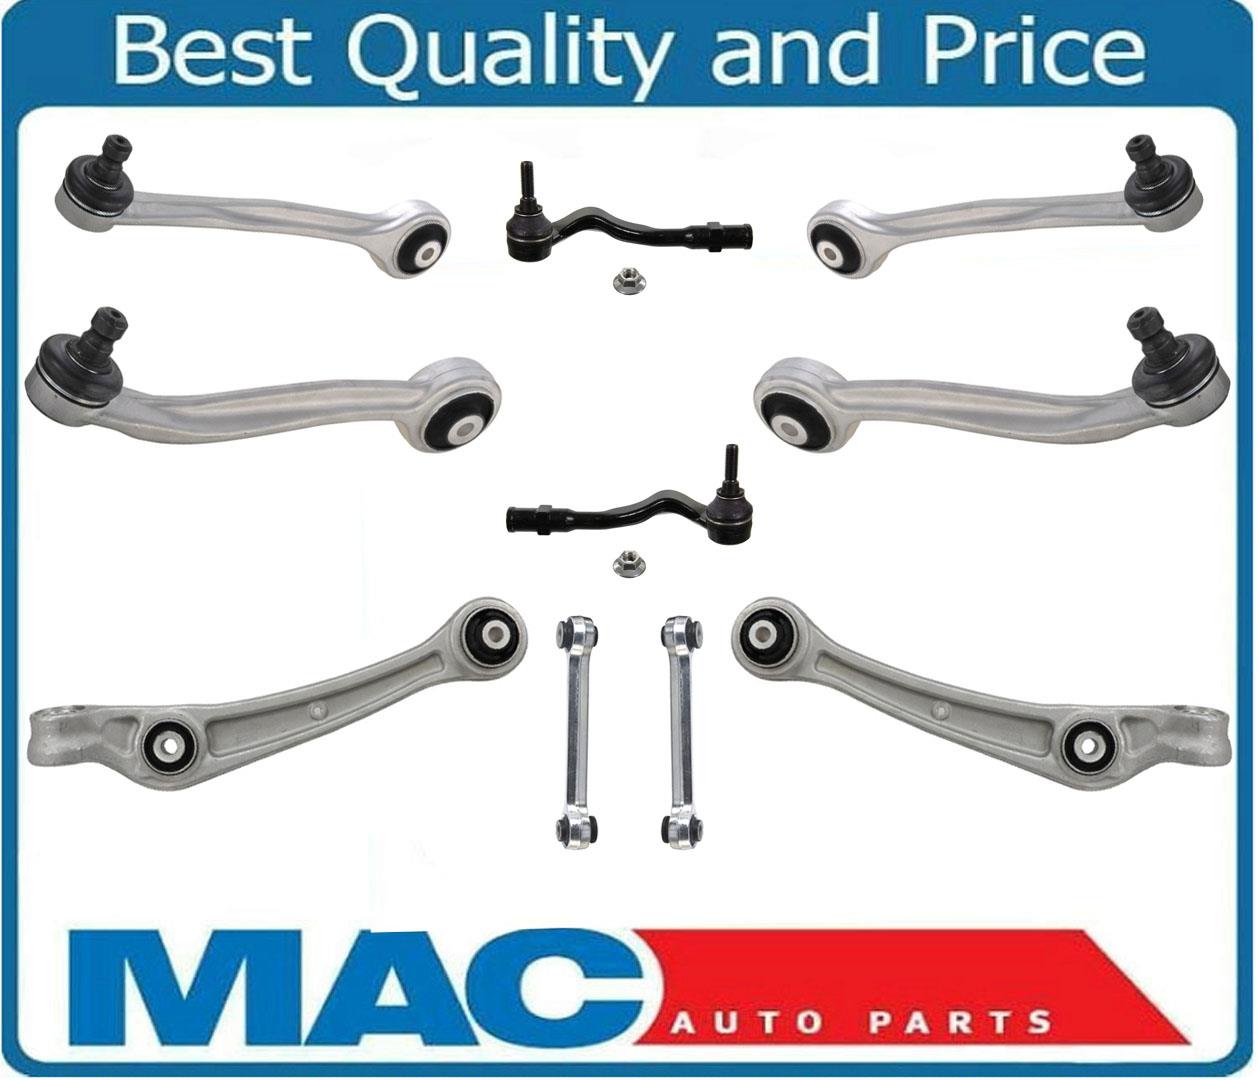 Front Lower And Upper Control Arms 10pc Kit Fits For Audi A4 12 15 A5 12 14 Ebay 9239